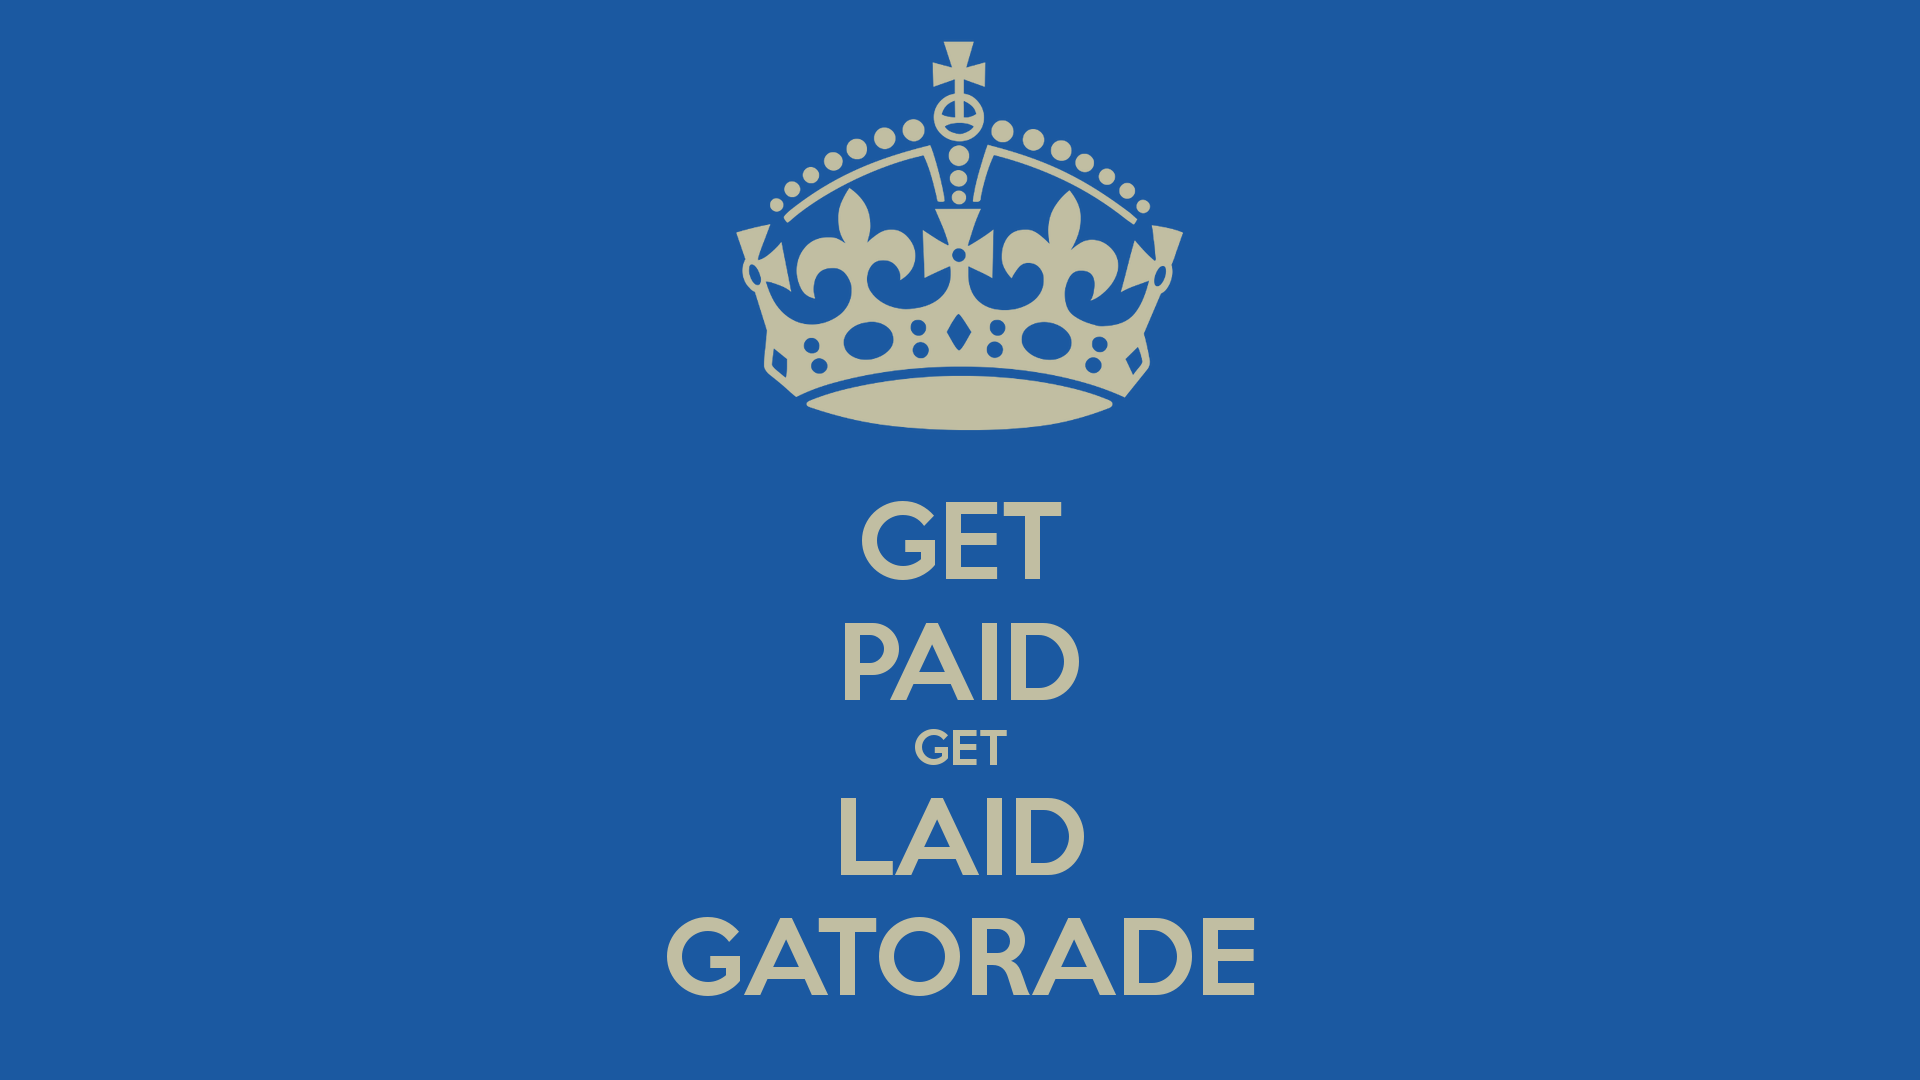 Get Paid Laid Gatorade,how To Make Money From Home - Keep Calm And Programing , HD Wallpaper & Backgrounds